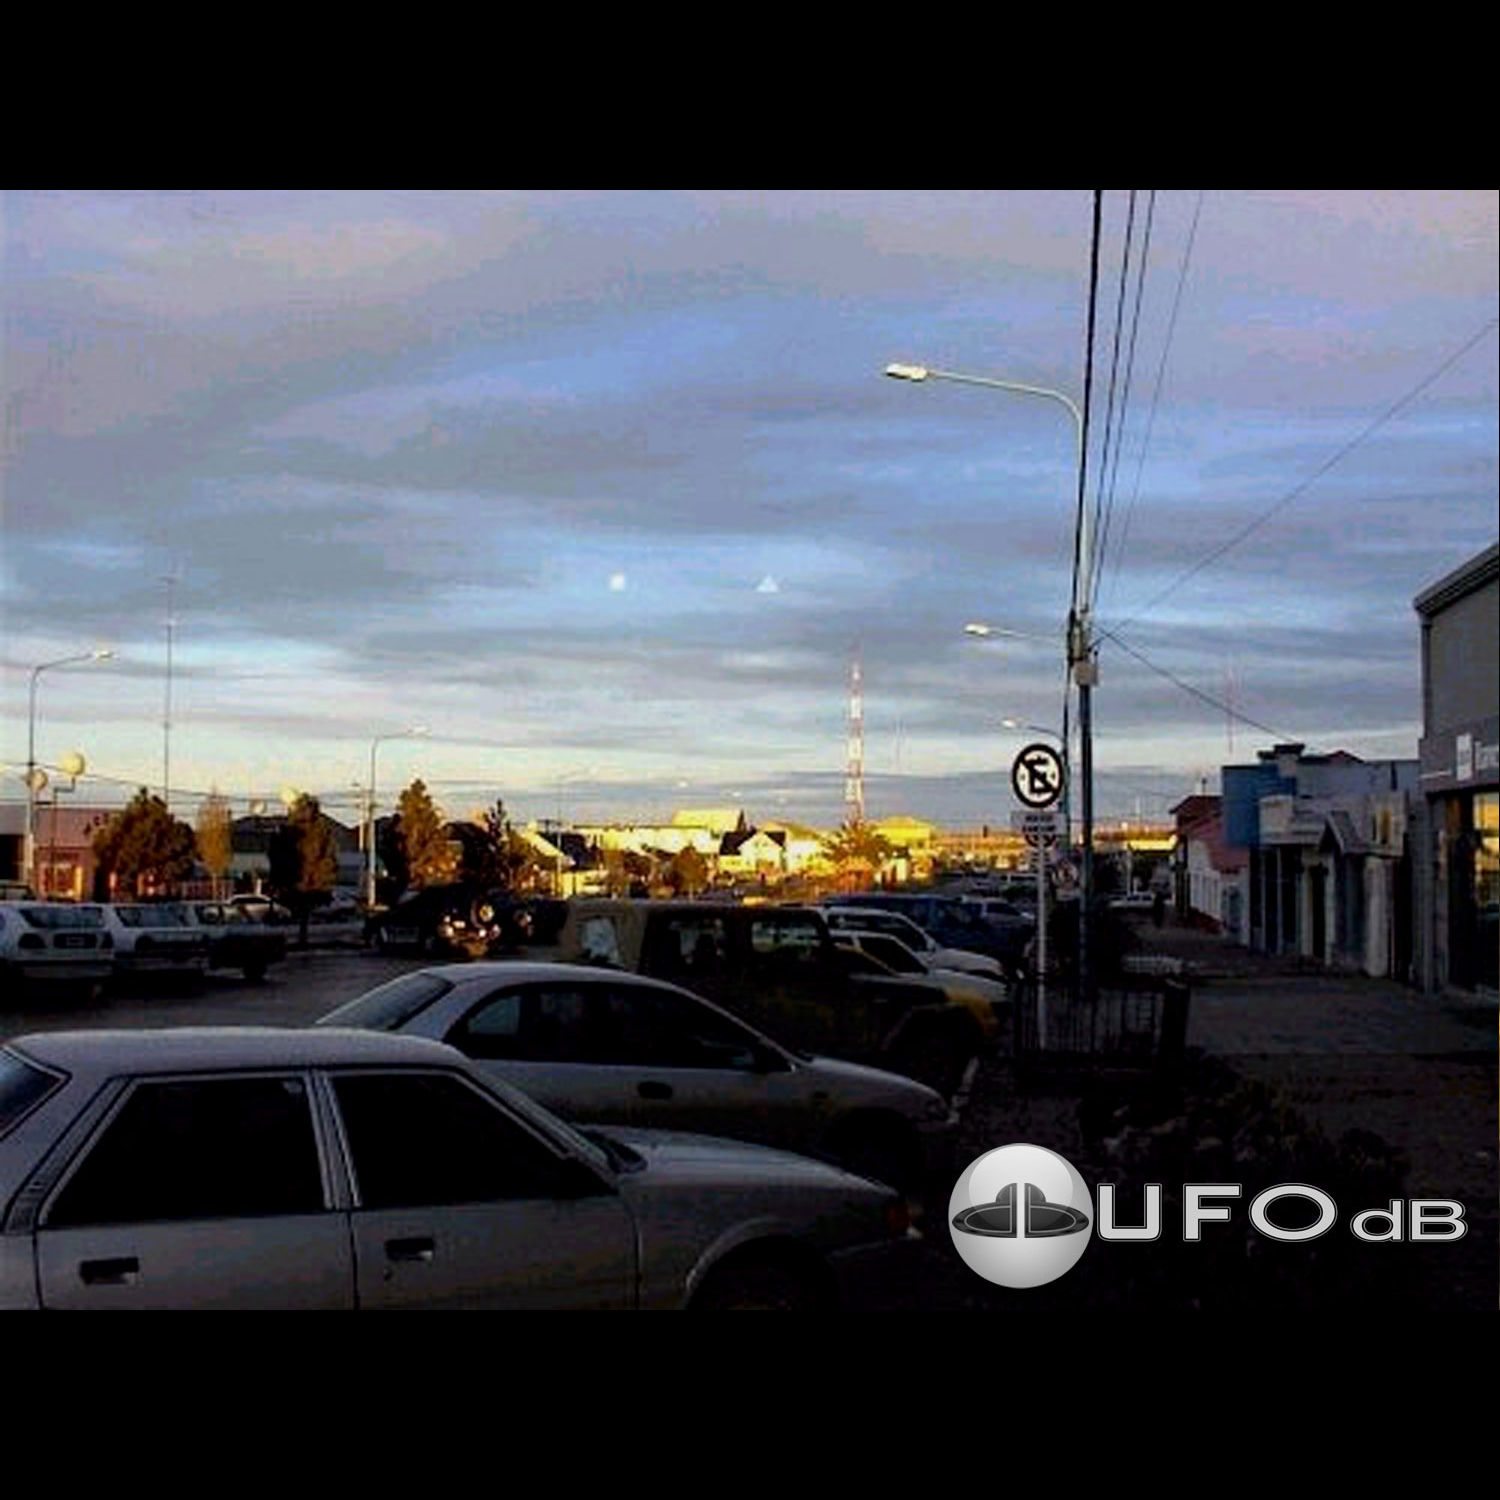 UFO seen at the end of the south American continent Tierra del Fuego UFO Picture #26-1